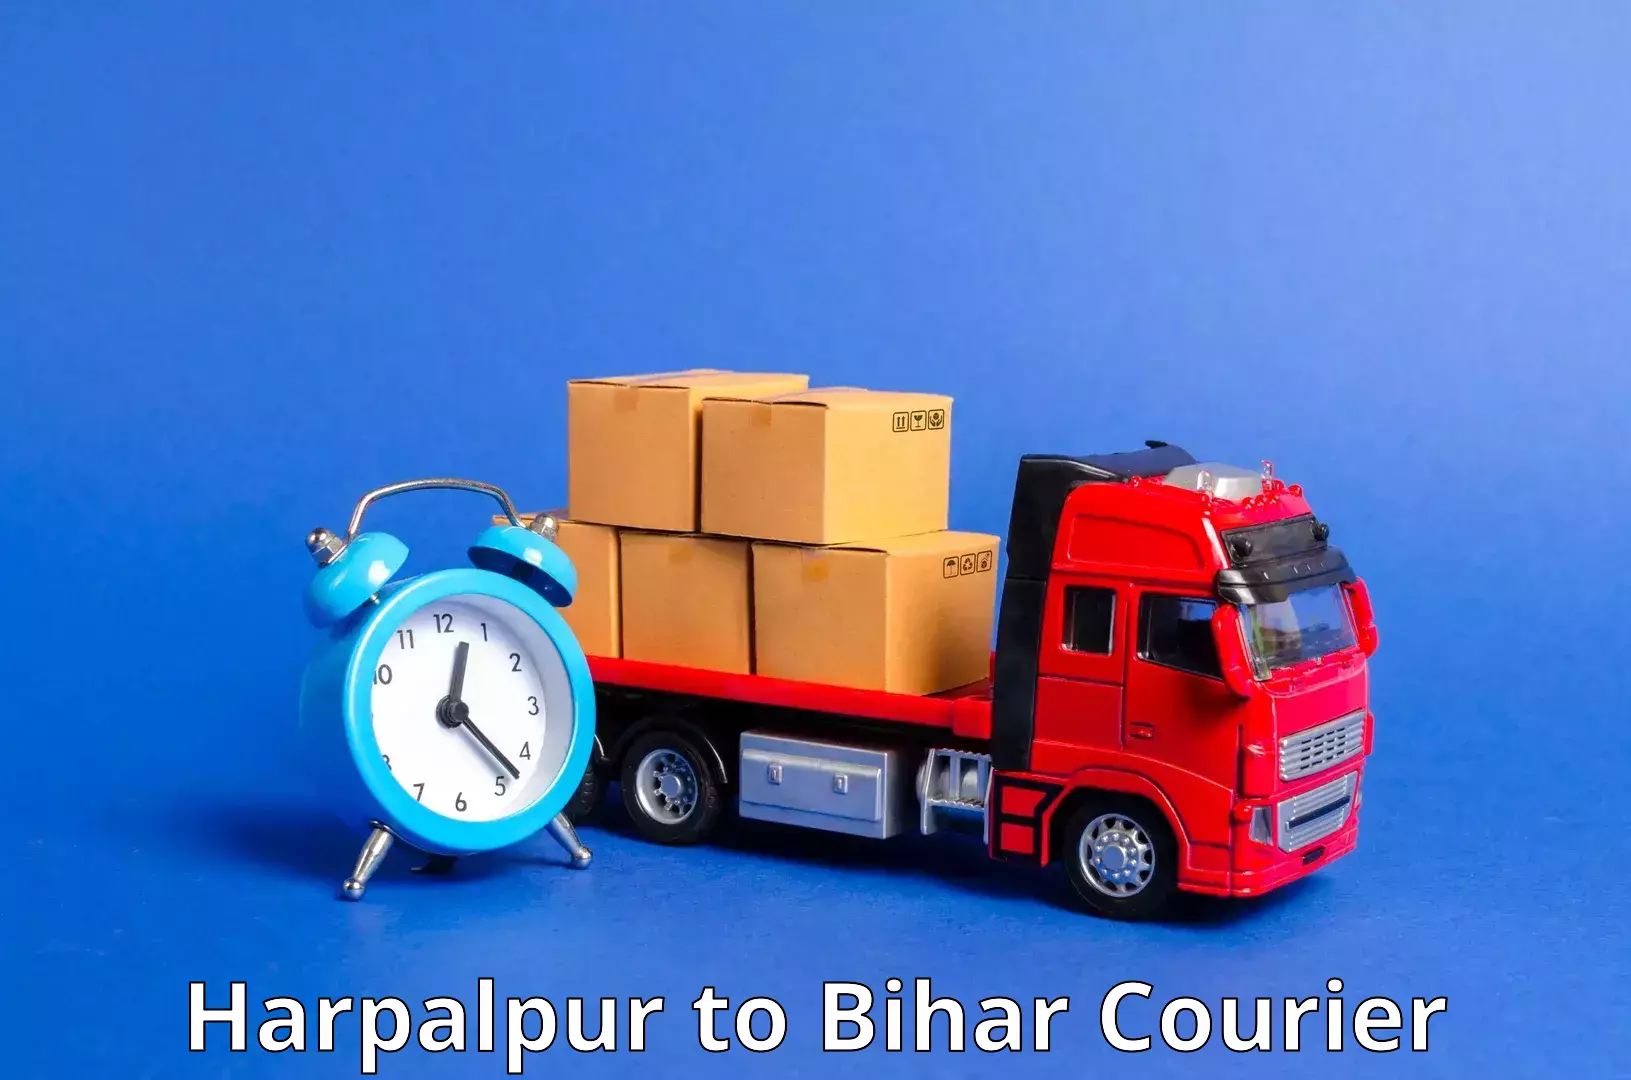 Delivery service partnership in Harpalpur to Jagdishpur Bhojpur